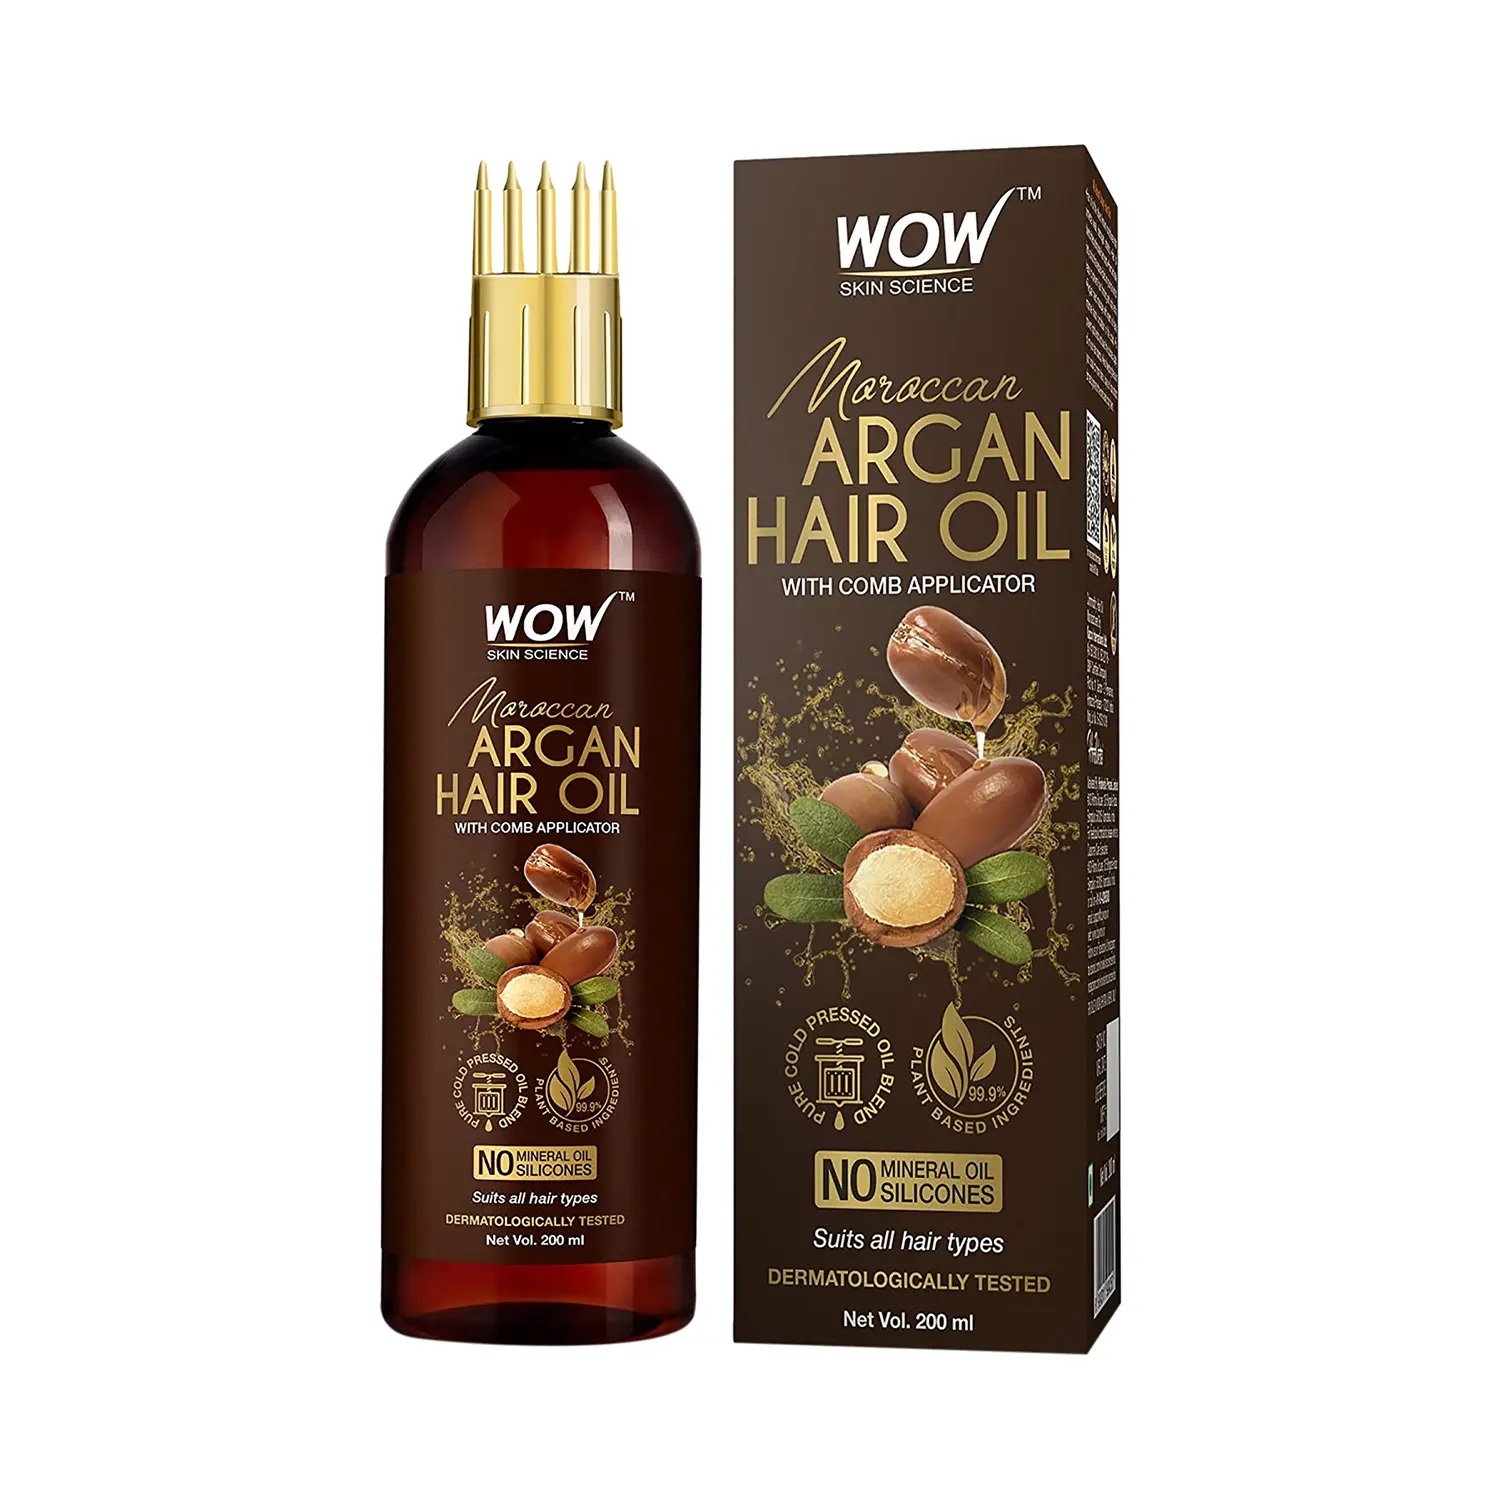 WOW SKIN SCIENCE | WOW SKIN SCIENCE Moroccan Argan Hair Oil with Comb Applicator (200ml)